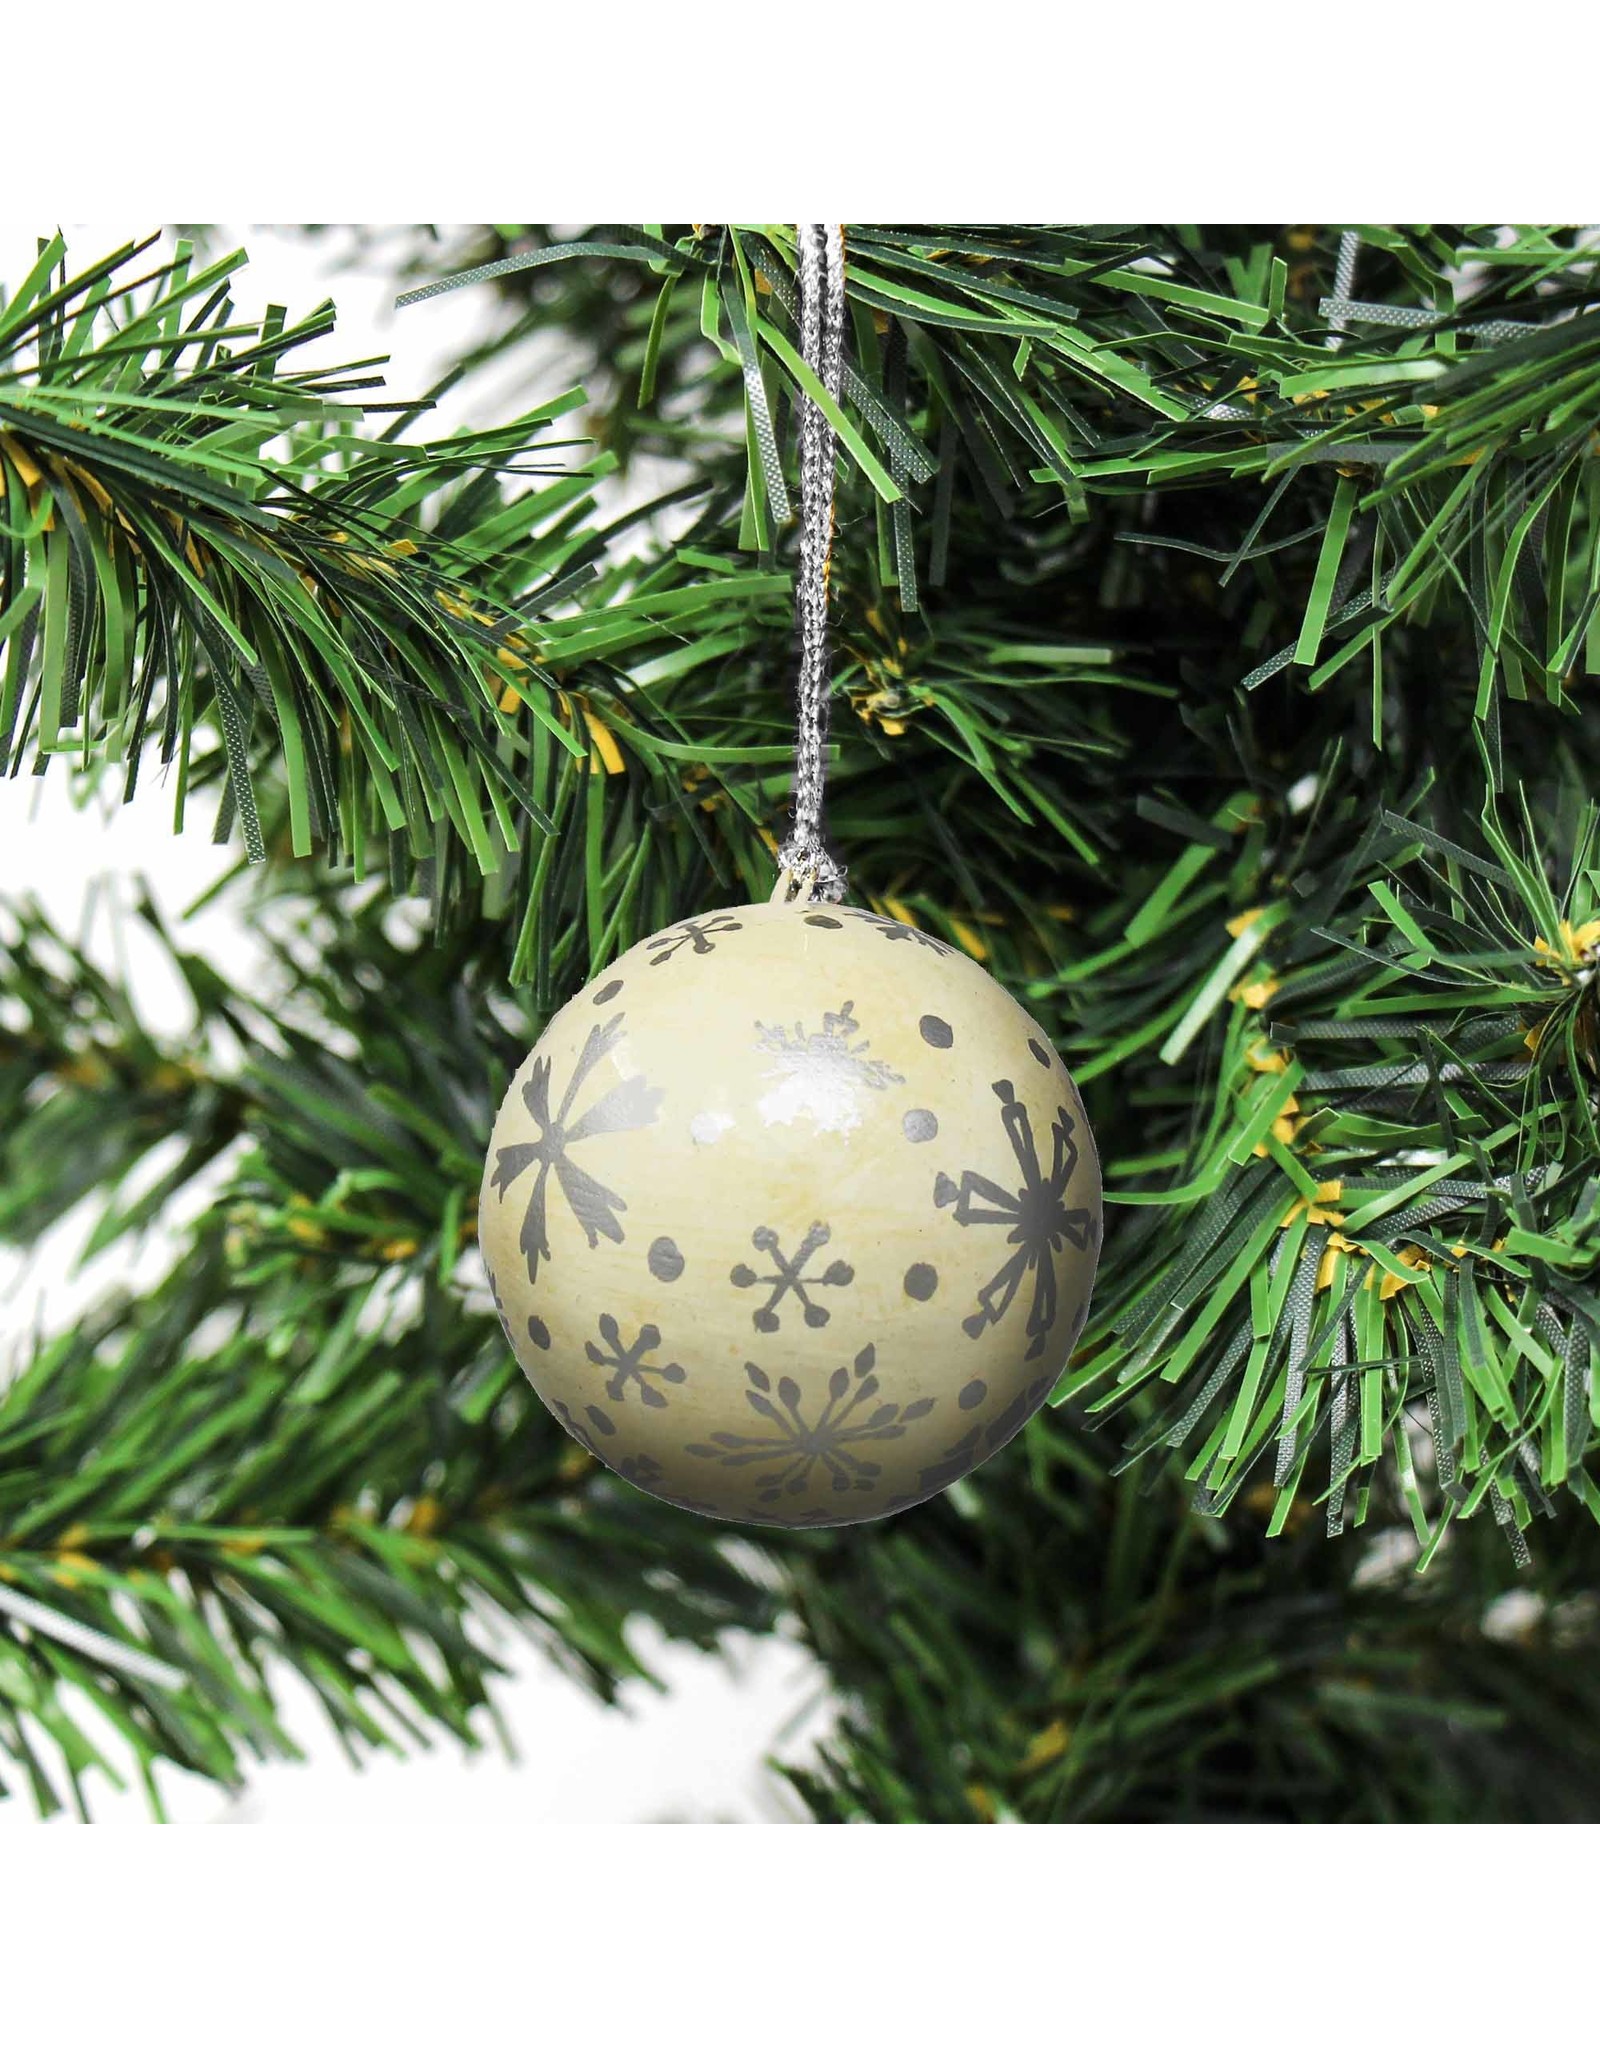 India CLEARANCE Handpainted Papier-Mâché Ornament, Silver Snowflake, India